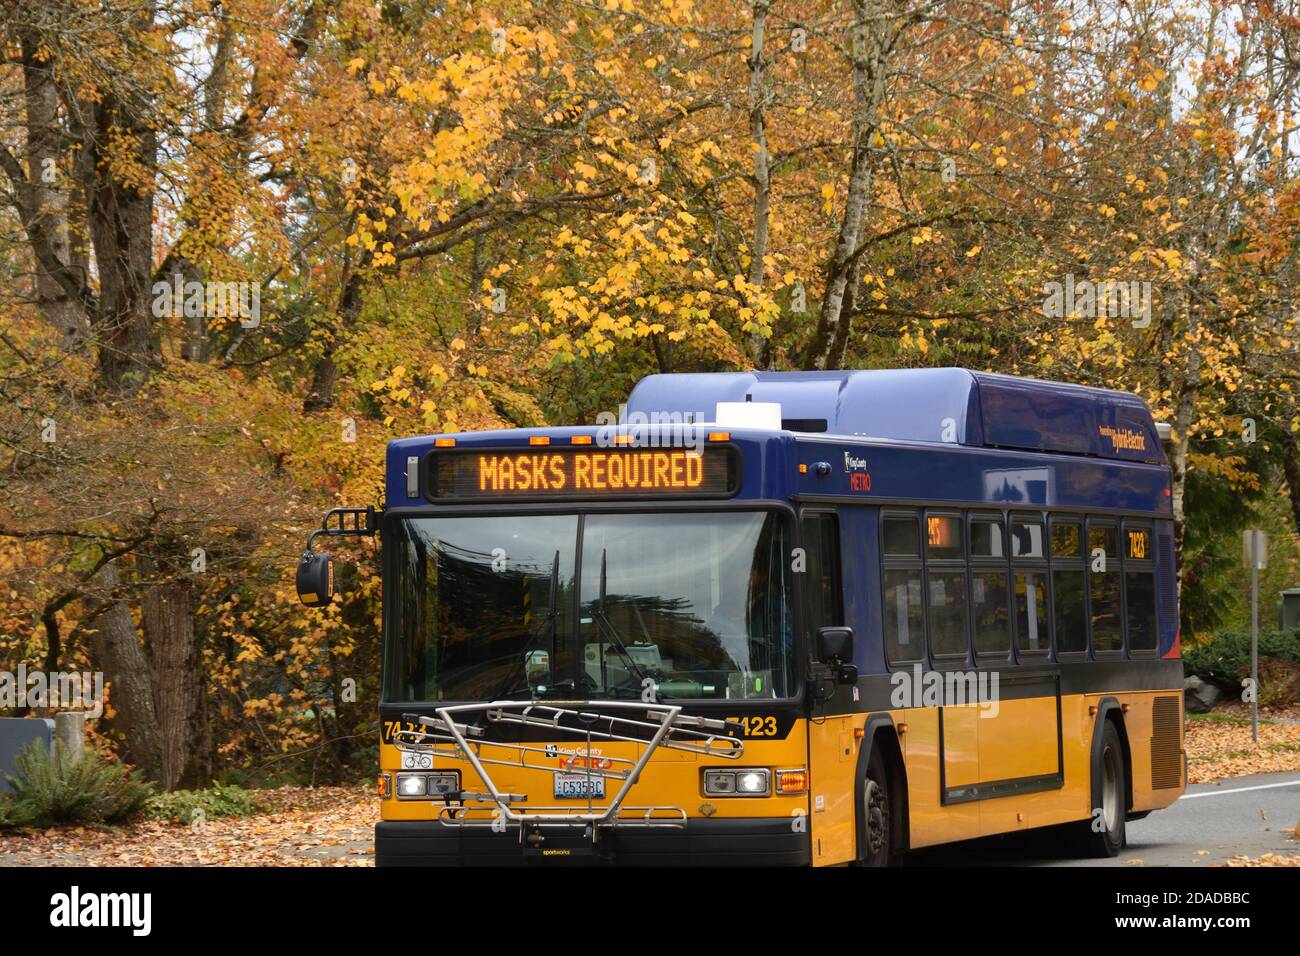 King county metro bus with 'mask required' sign during Covid-19 epidemic at Grass Lawn Park, Redmond, WA, USA. Stock Photo